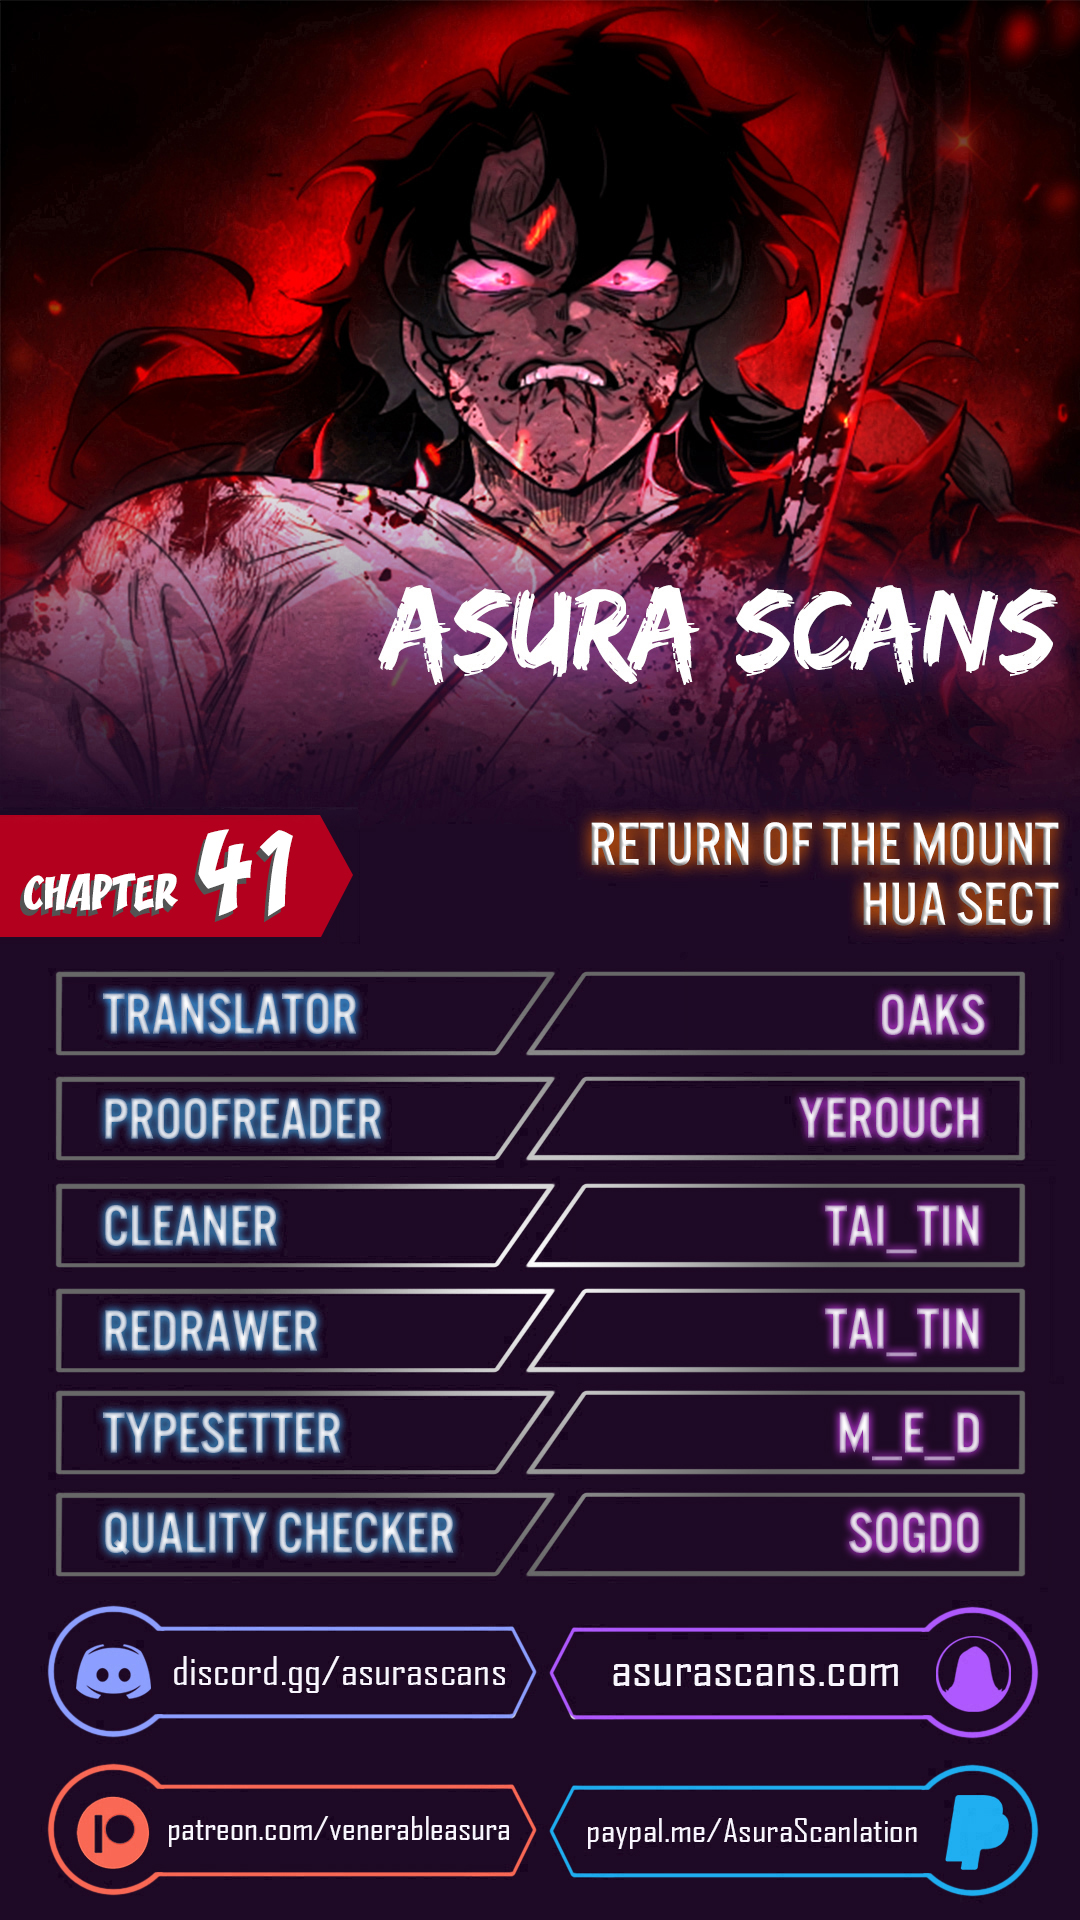 Return of the Mount Hua Sect - Chapter 11665 - Image 1